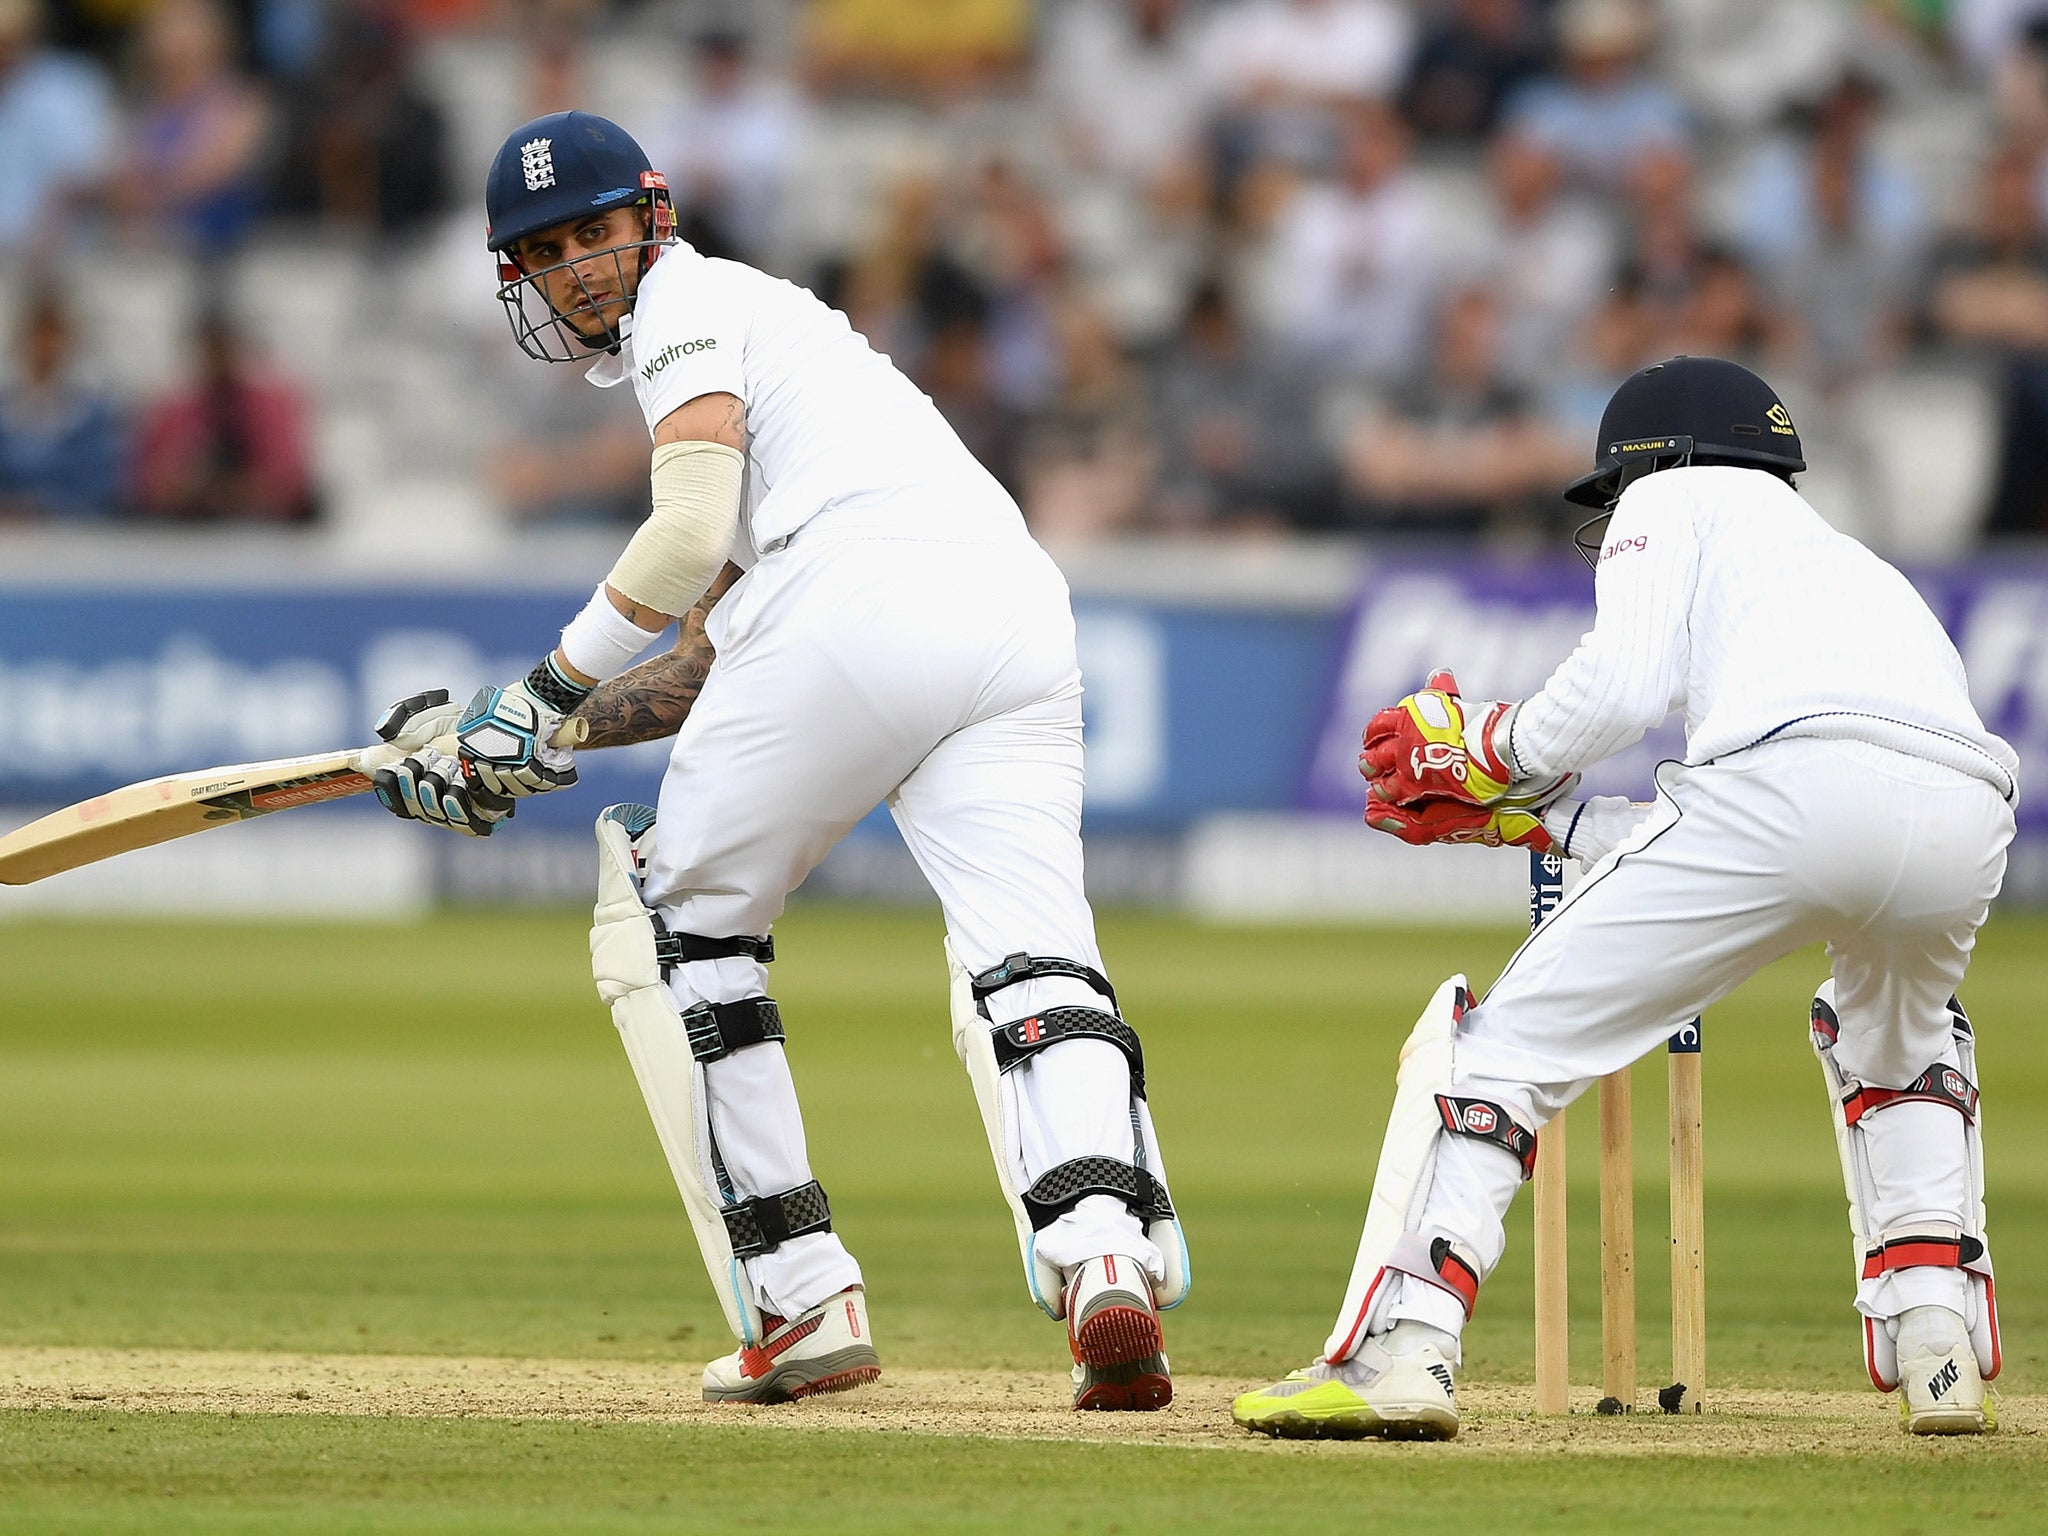 Alex Hales ended day three on 41 not-out